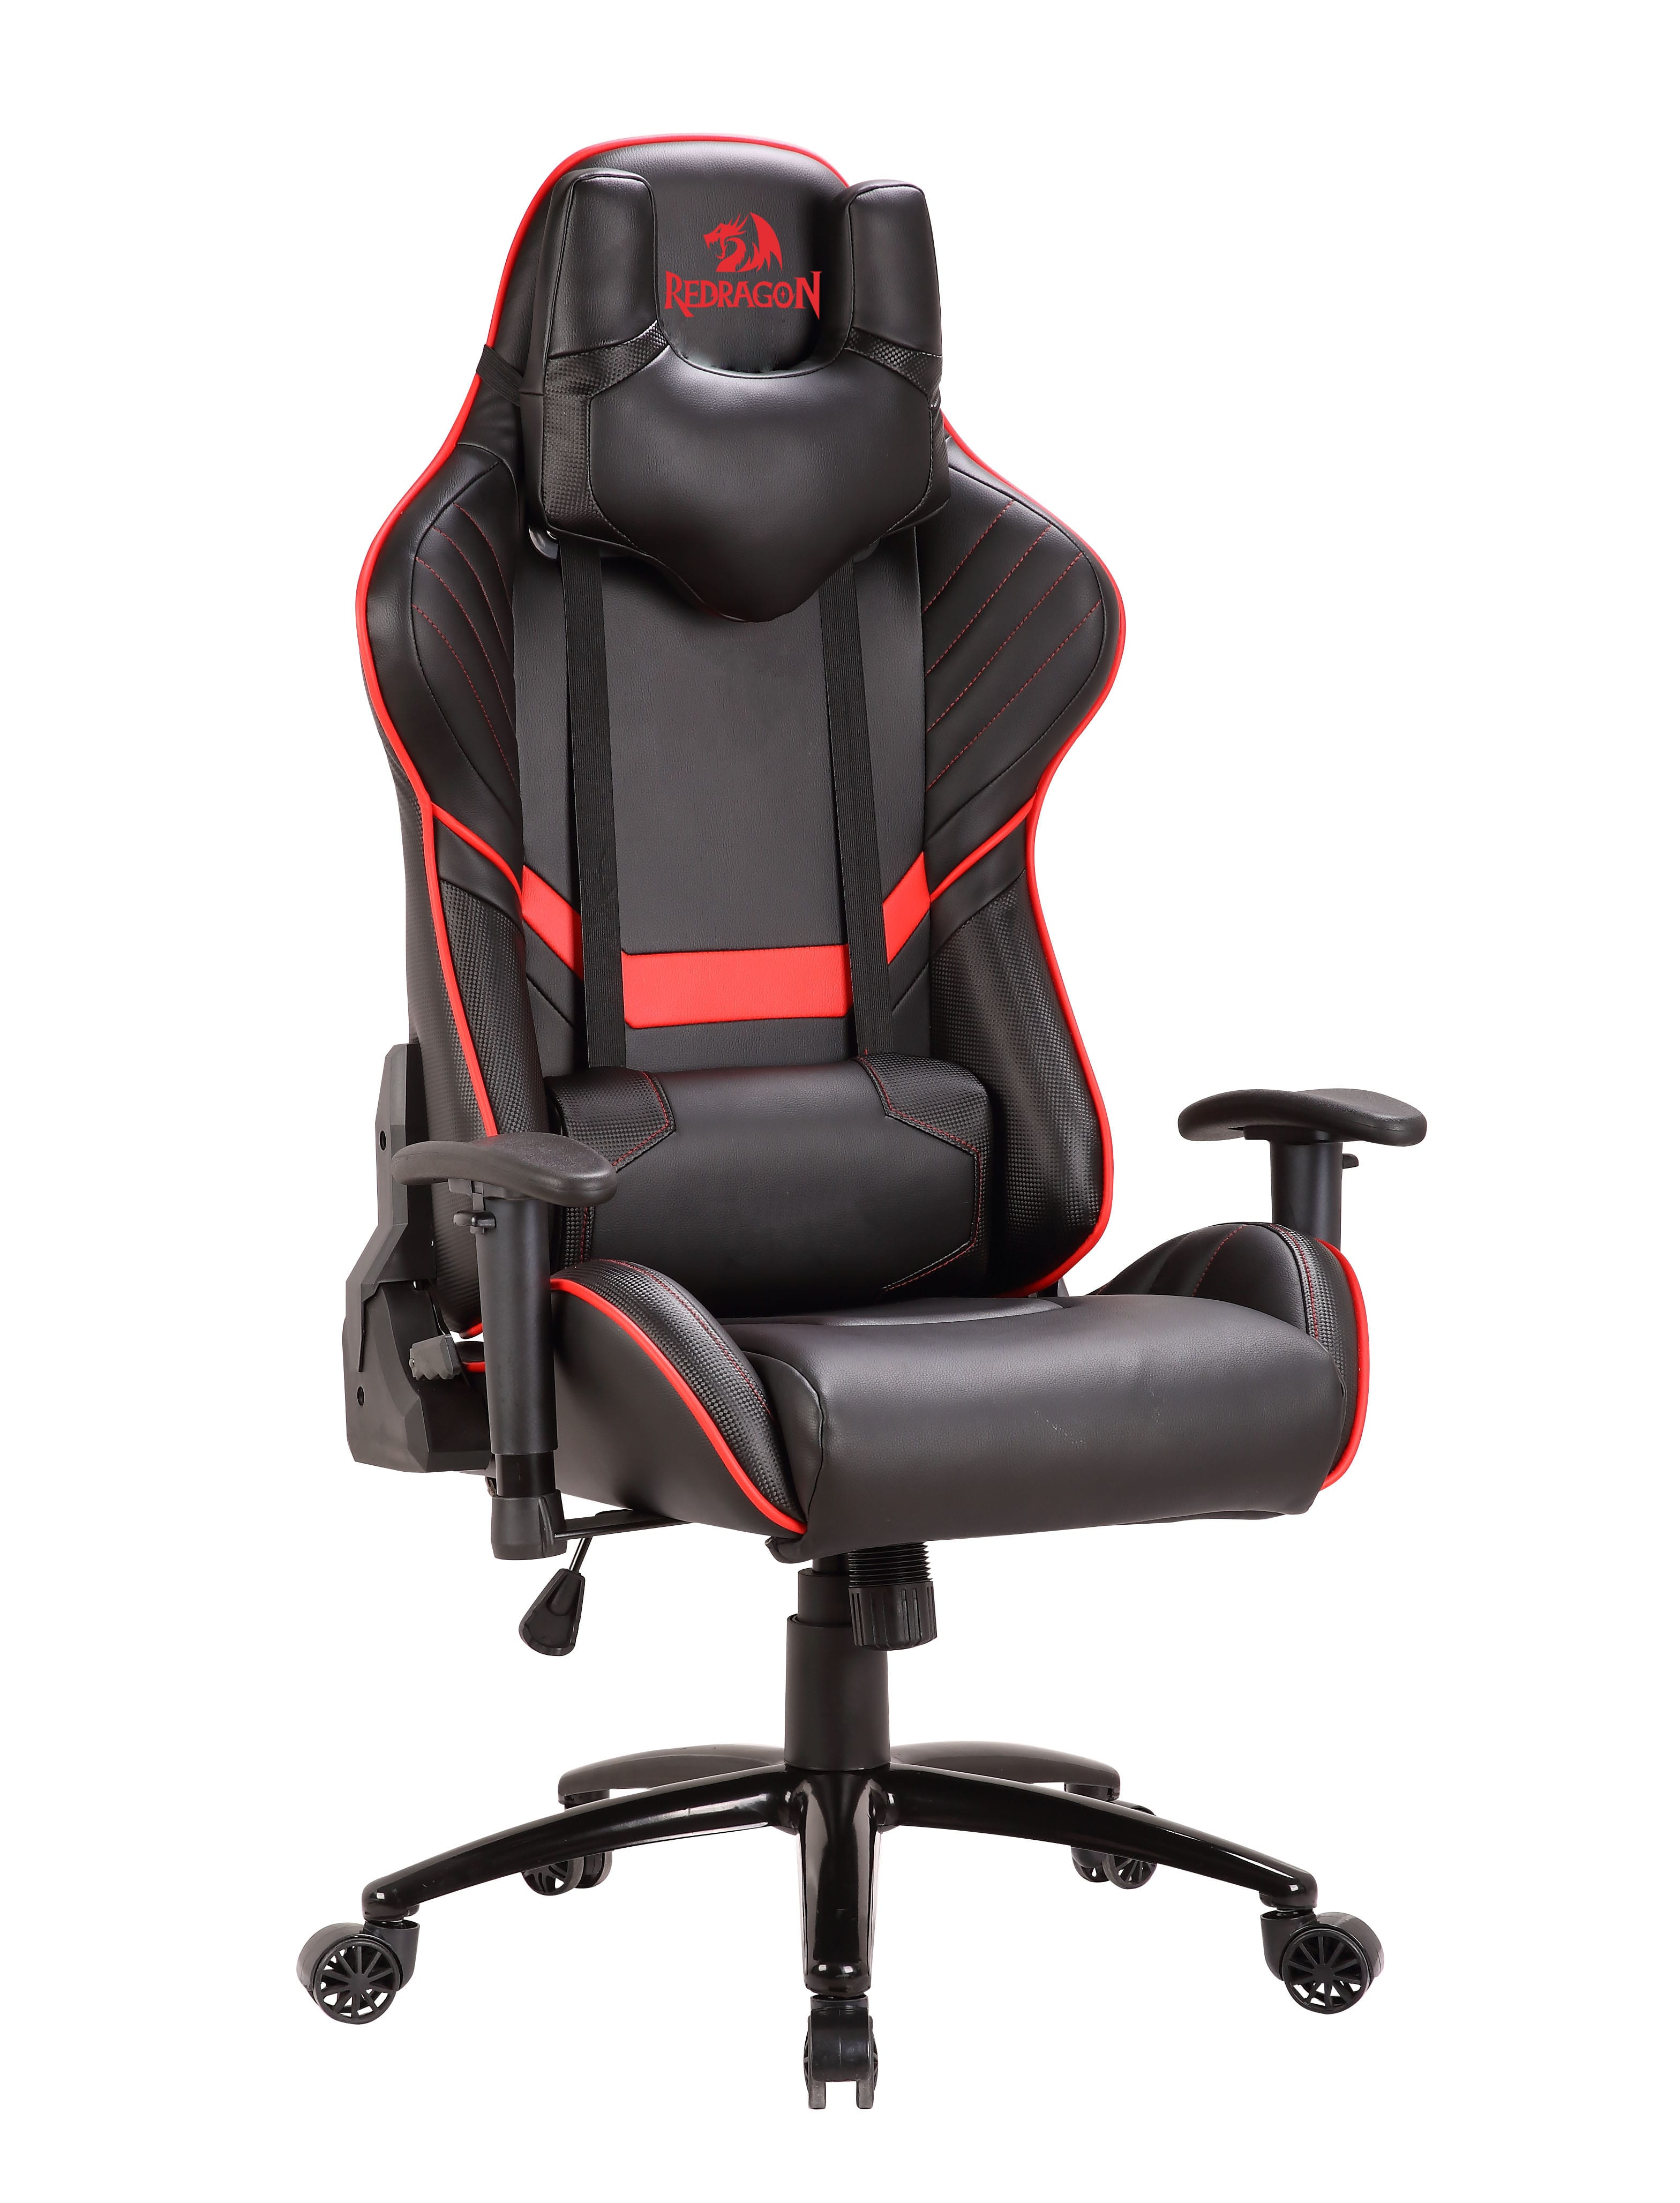 Redragon COEUS Gaming Chair Black and Red Syntech